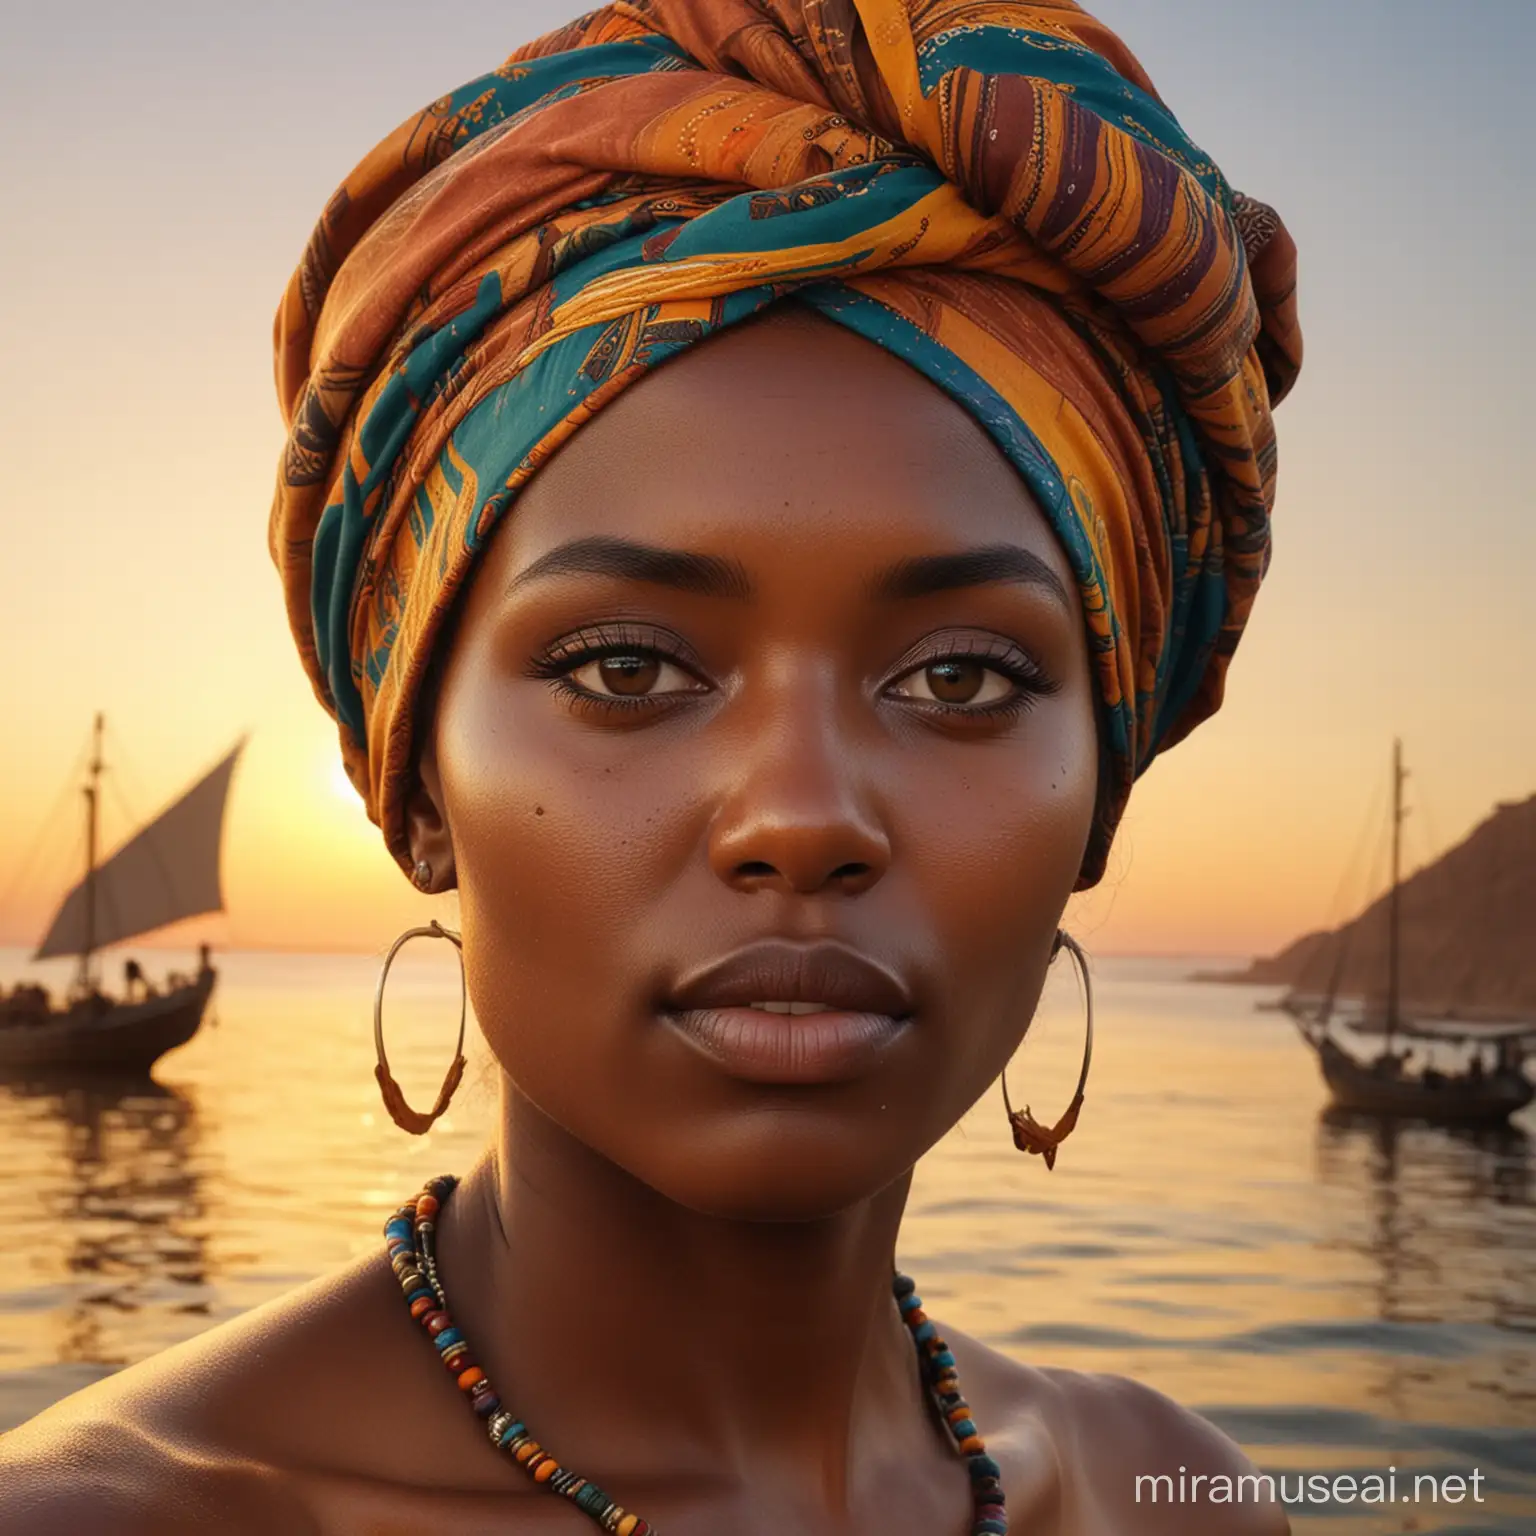 Imagine a portrait of a woman with a vivid, multicolored headwrap. Her face is a canvas for a detailed map of Africa set against a backdrop of a golden sunset and a sailing ship. The warm tones of the sunset highlight the continent's outline and the rich textures of the sea. This fusion creates a poignant narrative, with teardrops running down her cheeks, illustrating the beauty and complex history of Africa. The woman's eyes, rendered with striking realism, hold a reflective and soulful gaze that invites contemplation. The image is a high-resolution render, focused on blending the elements seamlessly for a hyper-realistic and emotive effect, 32k render, hyperrealistic, detailled.